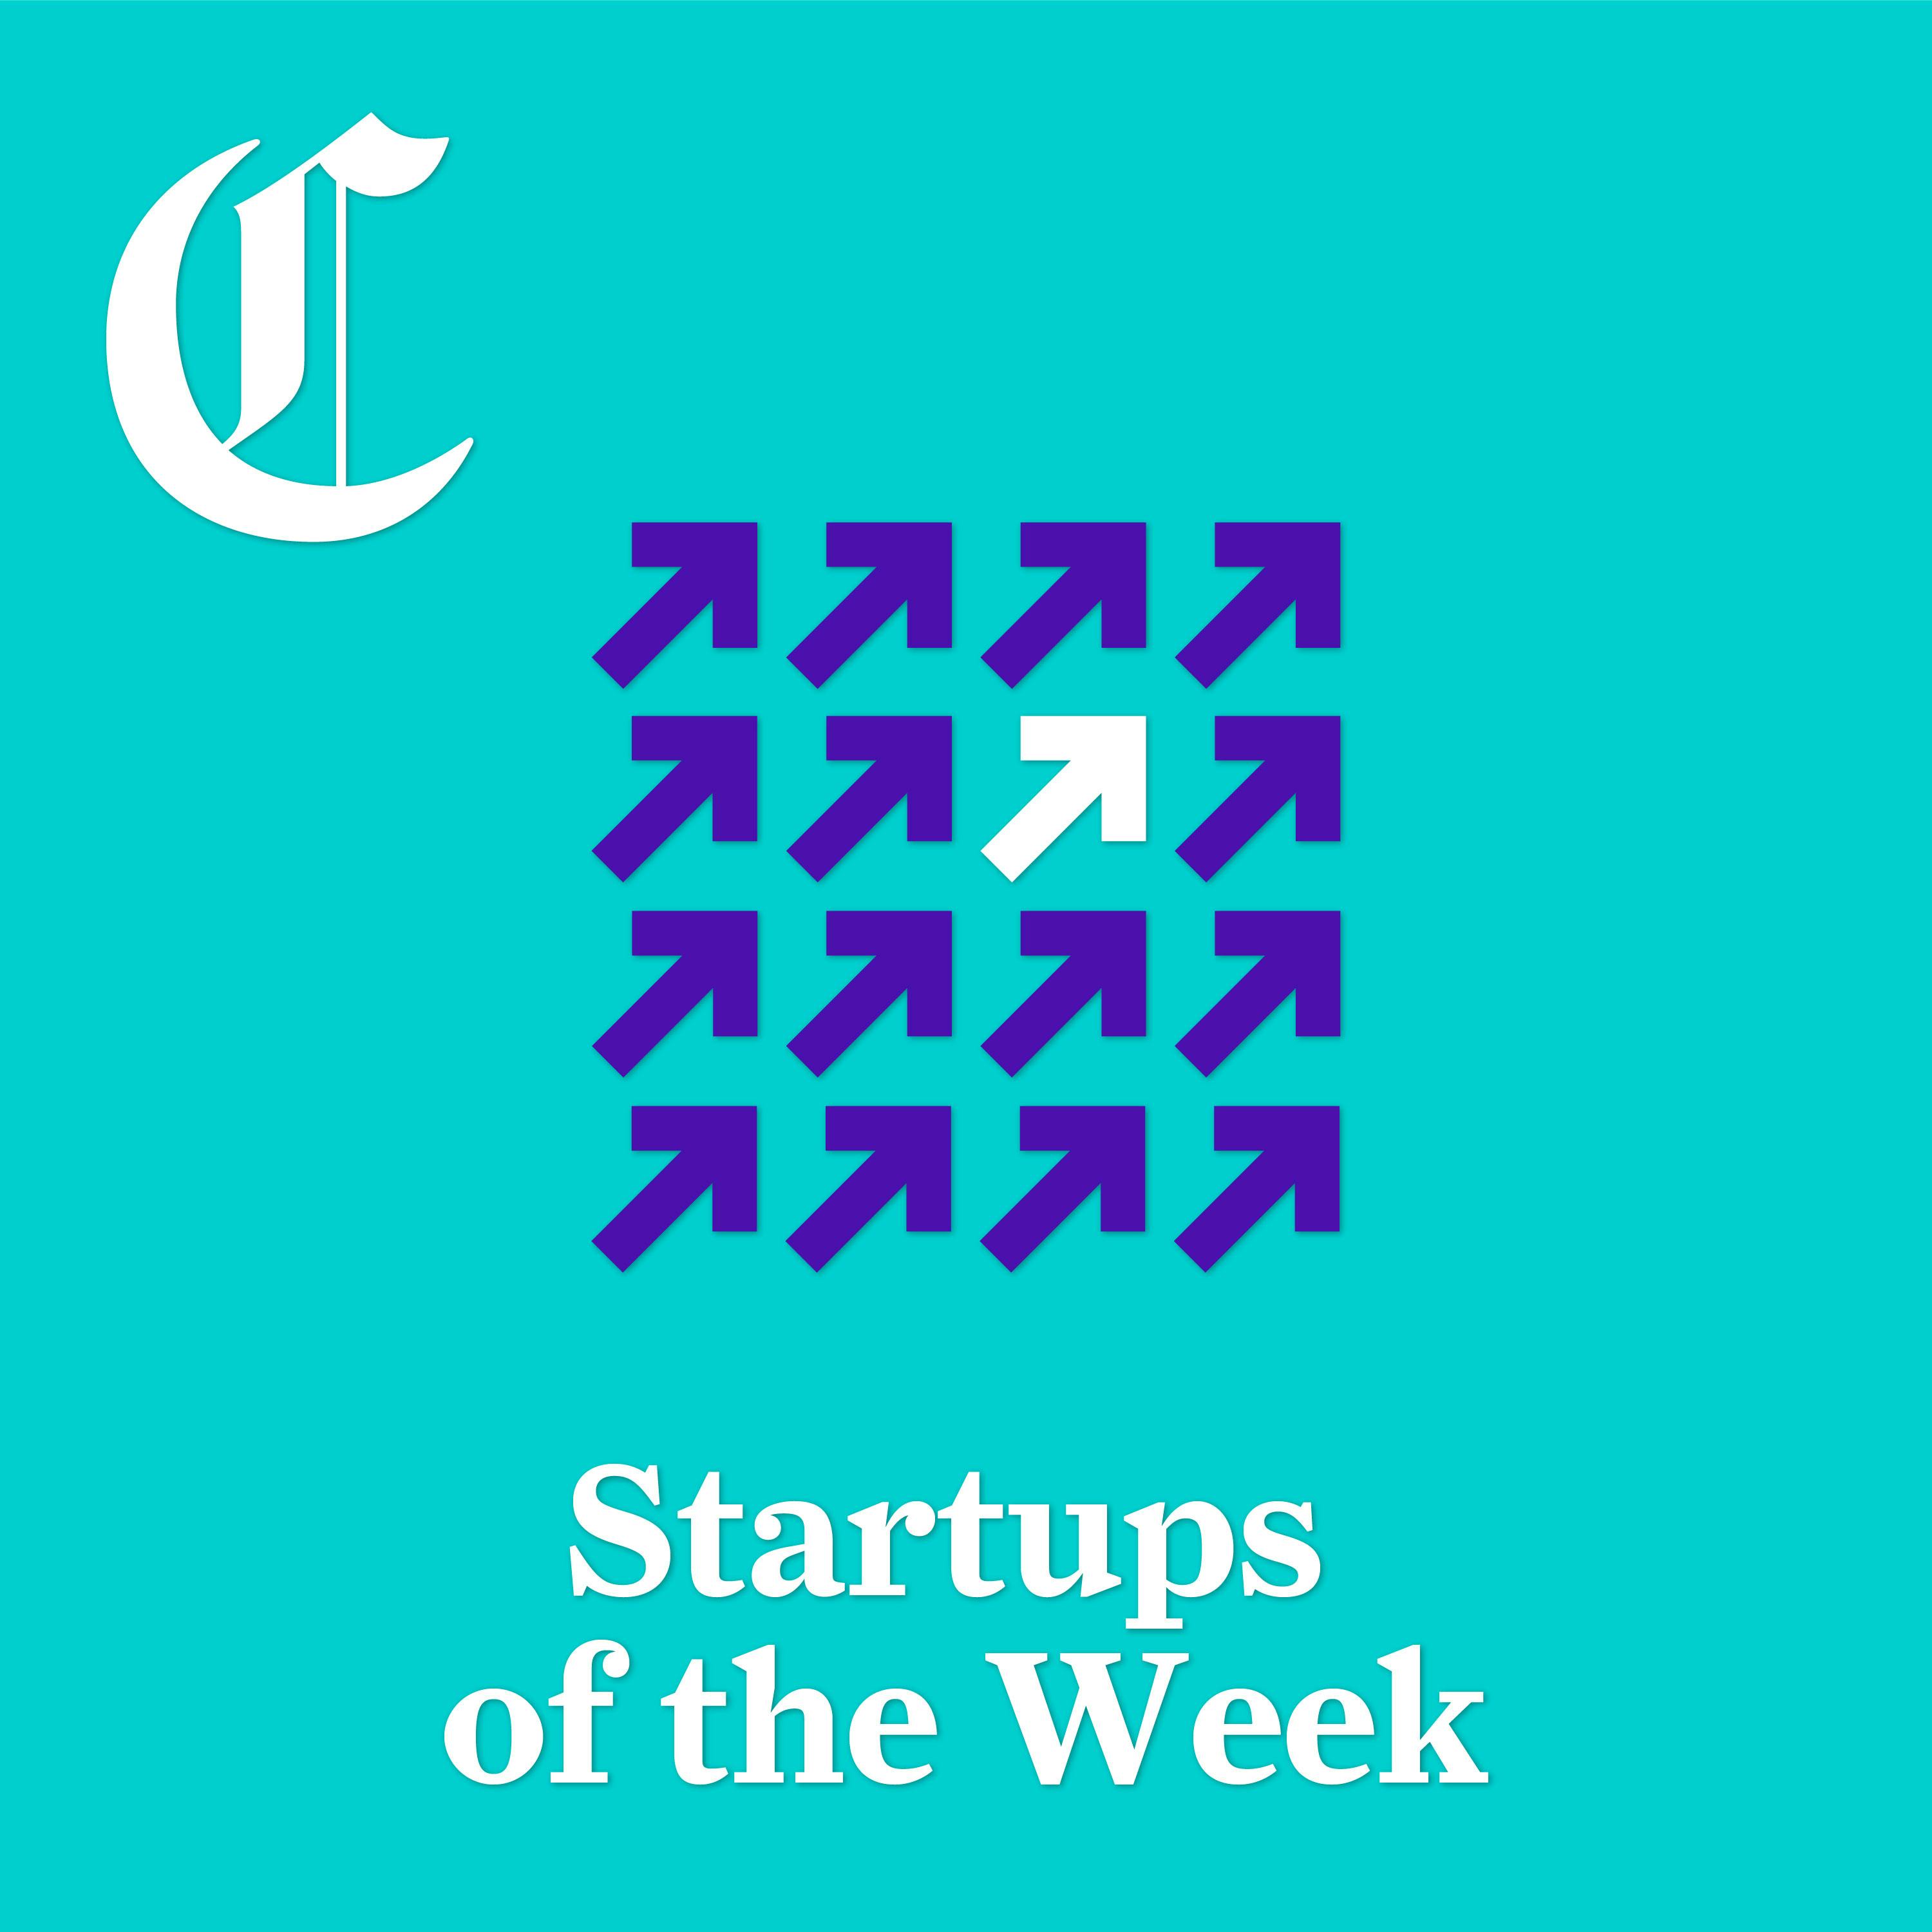 Startups of the Week